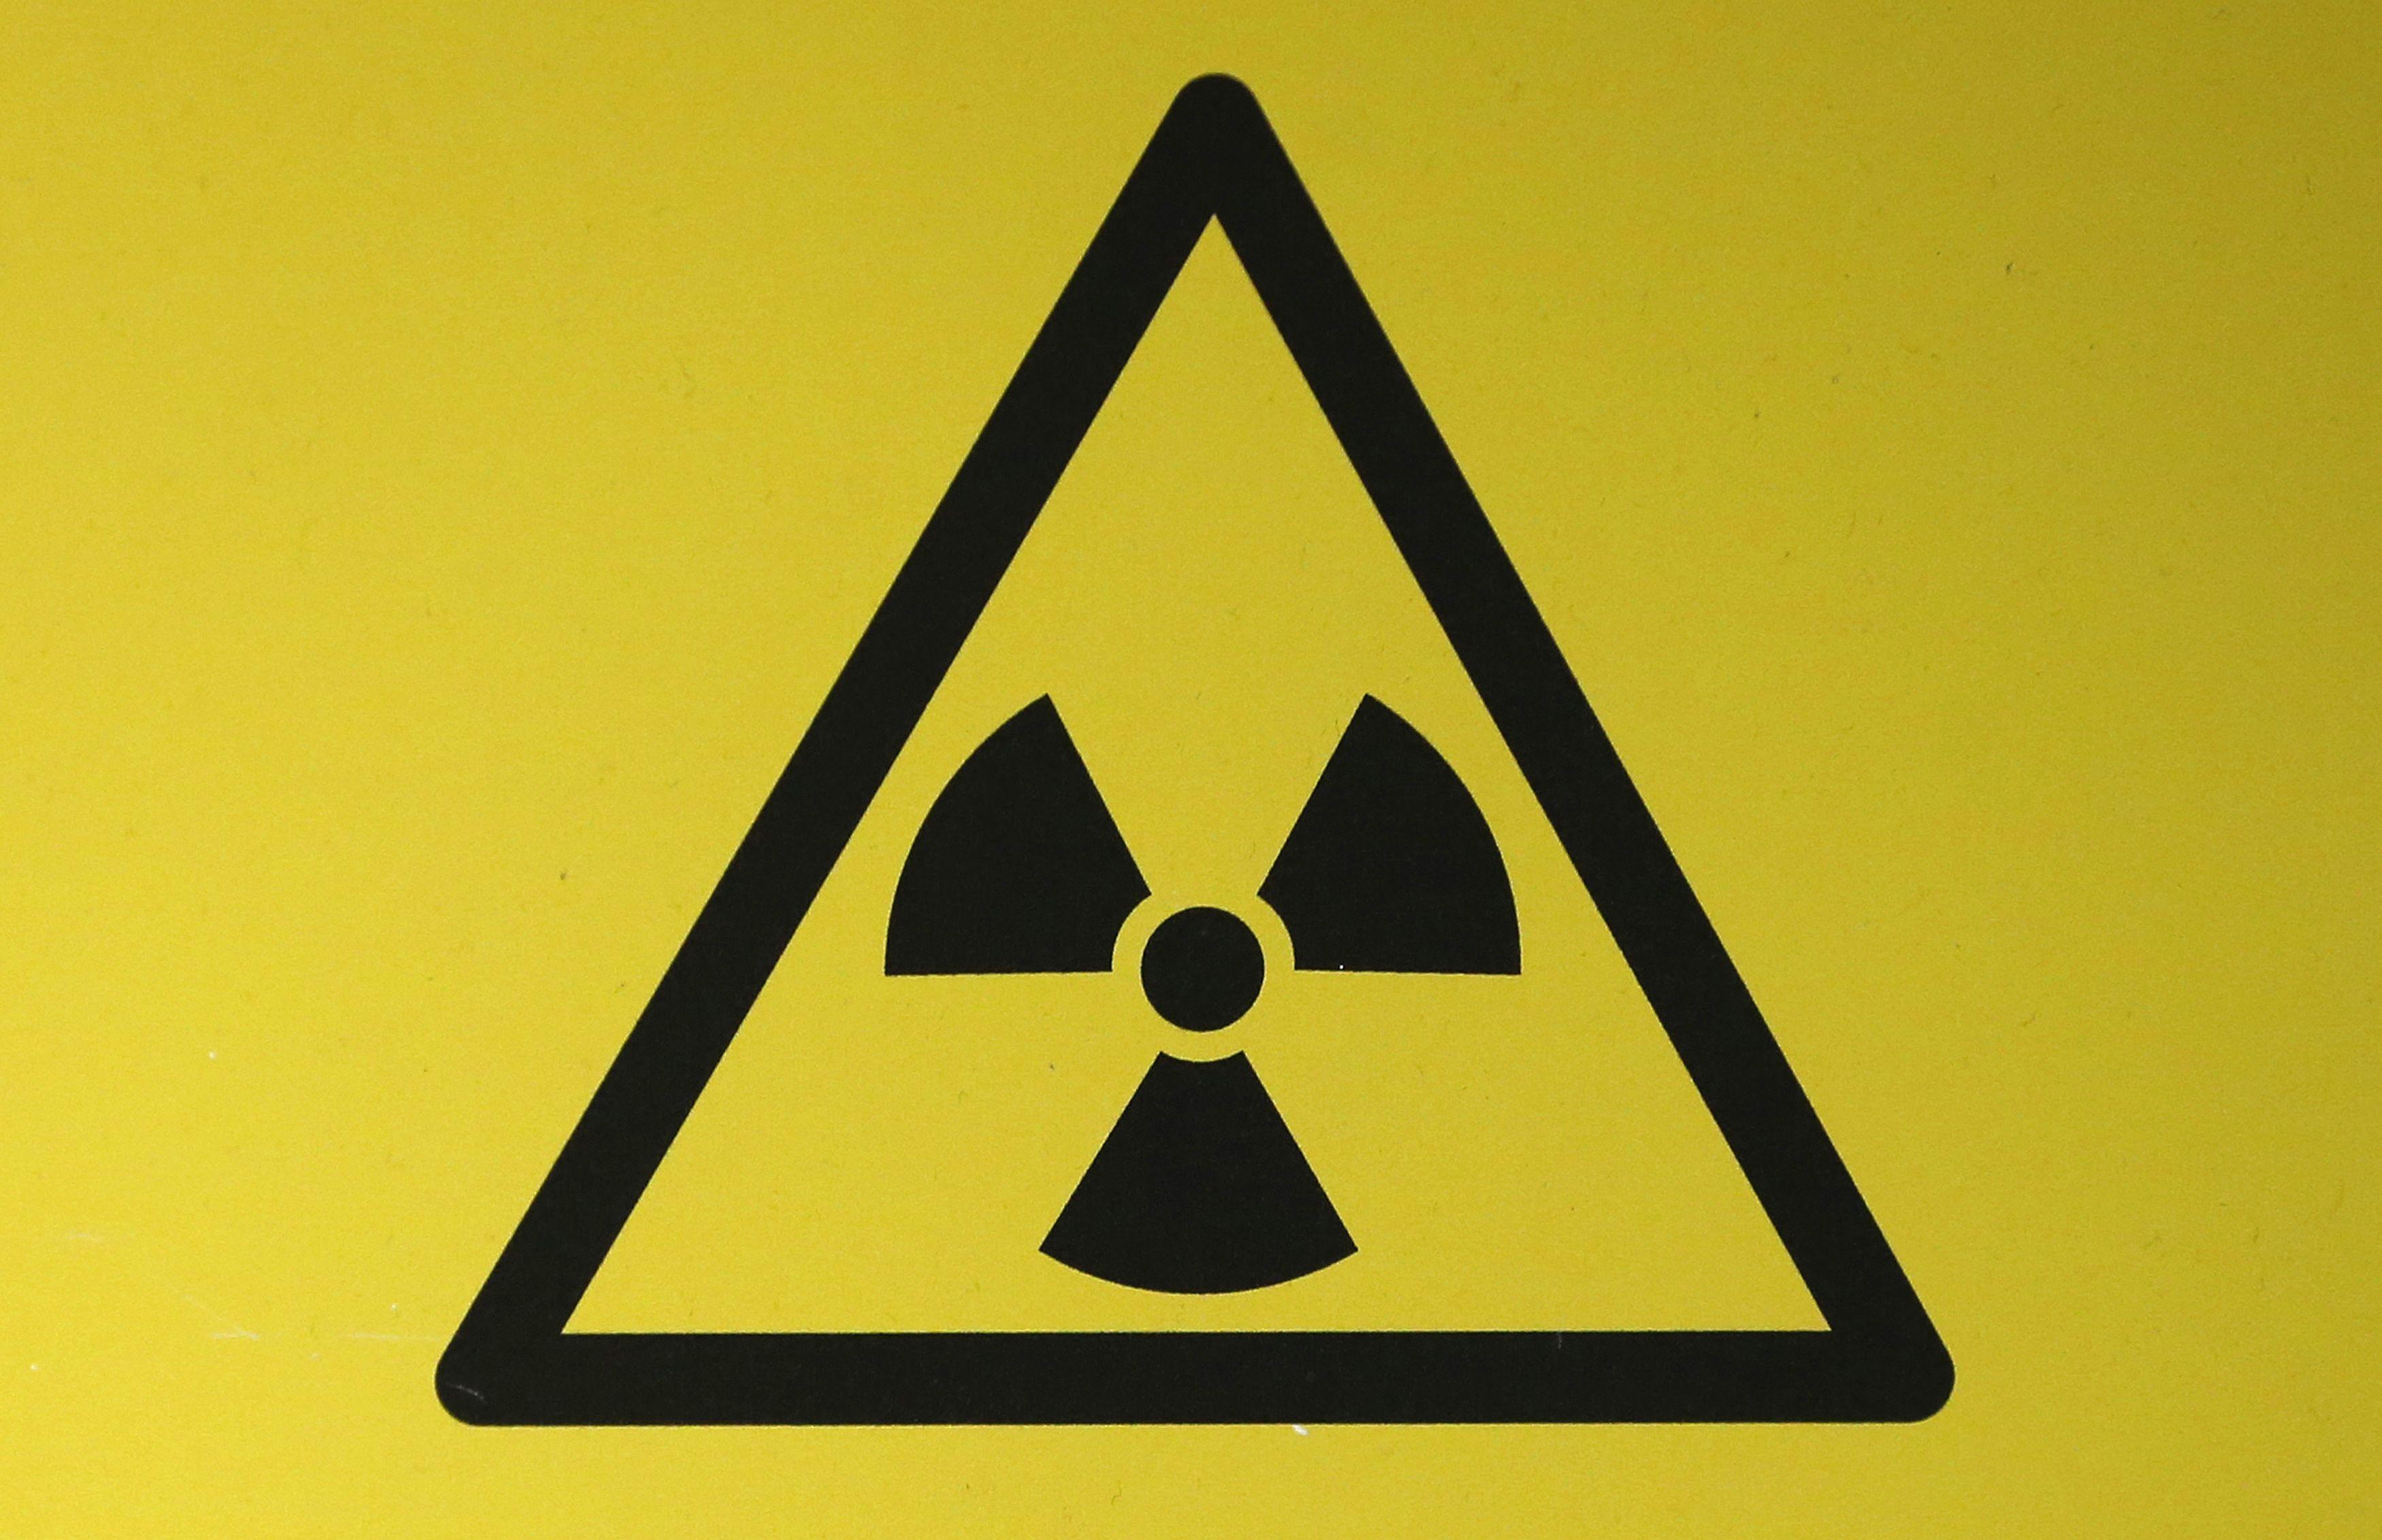 A RADIOACTIVE MATERIAL HAZARD SYMBOL, CALLED A TREFOIL, IS SEEN